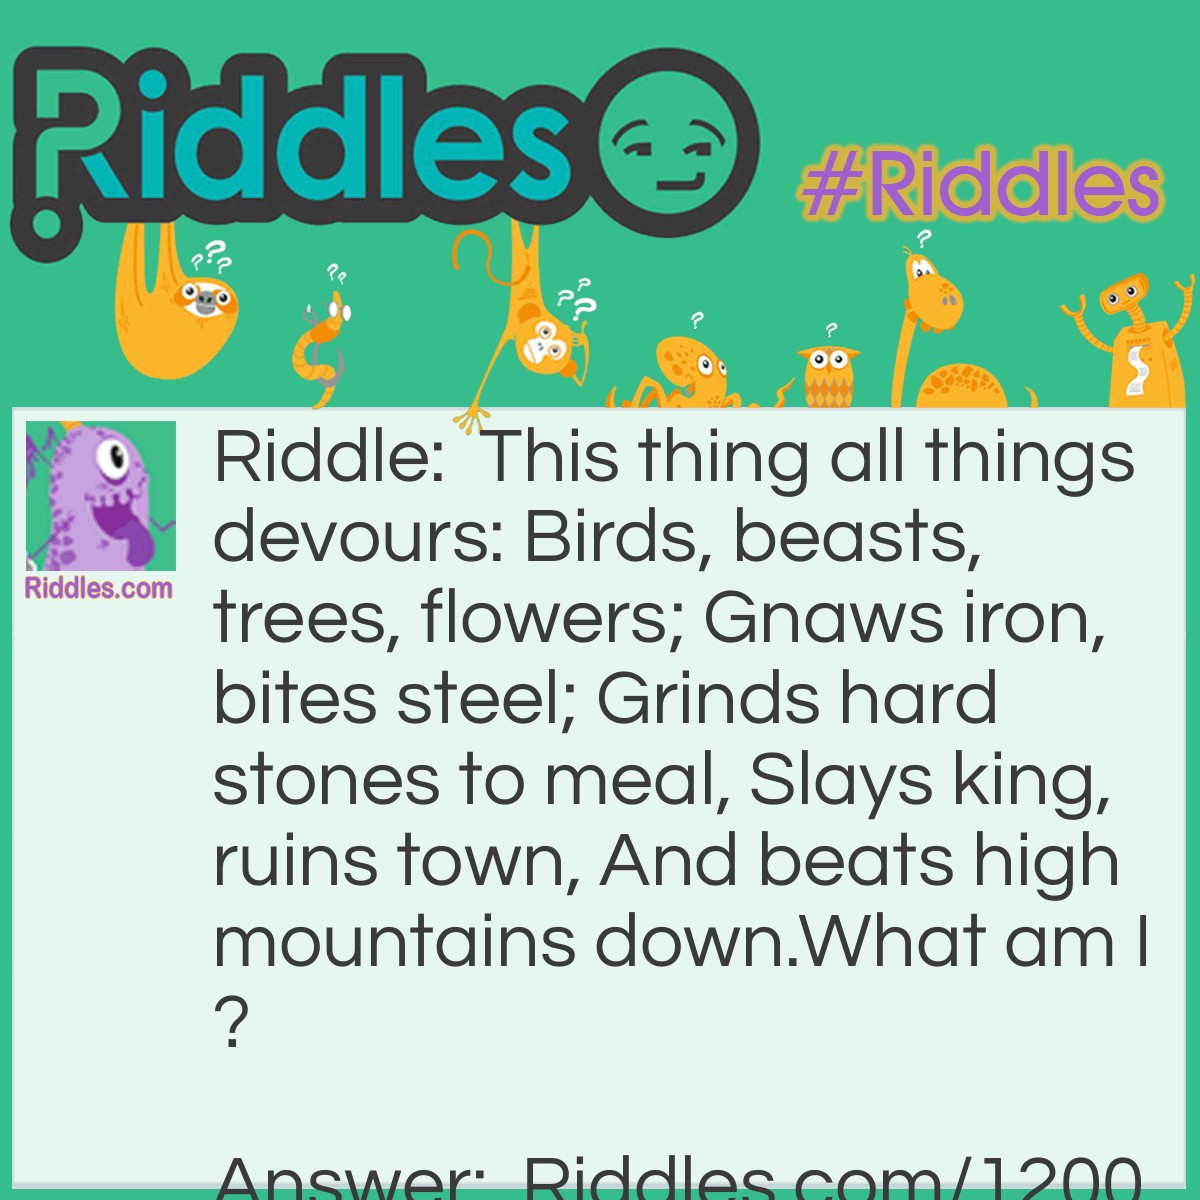 Riddle: This thing all things devours: Birds, beasts, trees, flowers; Gnaws iron, bites steel; Grinds hard stones to meal, Slays king, ruins town, And beats high mountains down.
What am I? Answer: Time